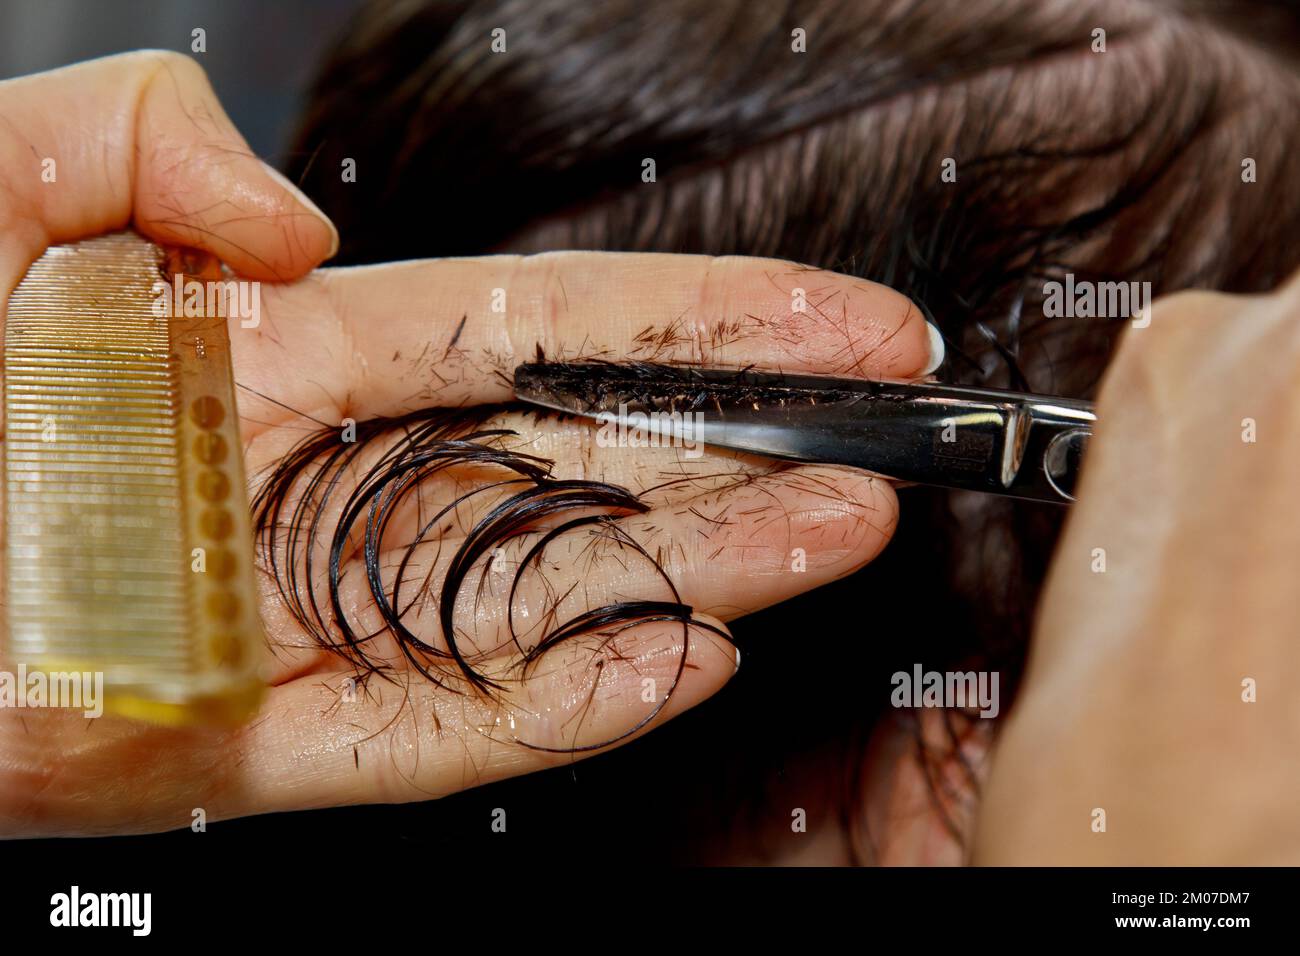 Closeup of a hairdresser cuts the wet brown hair of a client in a salon. Hairdresser cuts a woman. Side view of a hand cutting hair with scissors Stock Photo